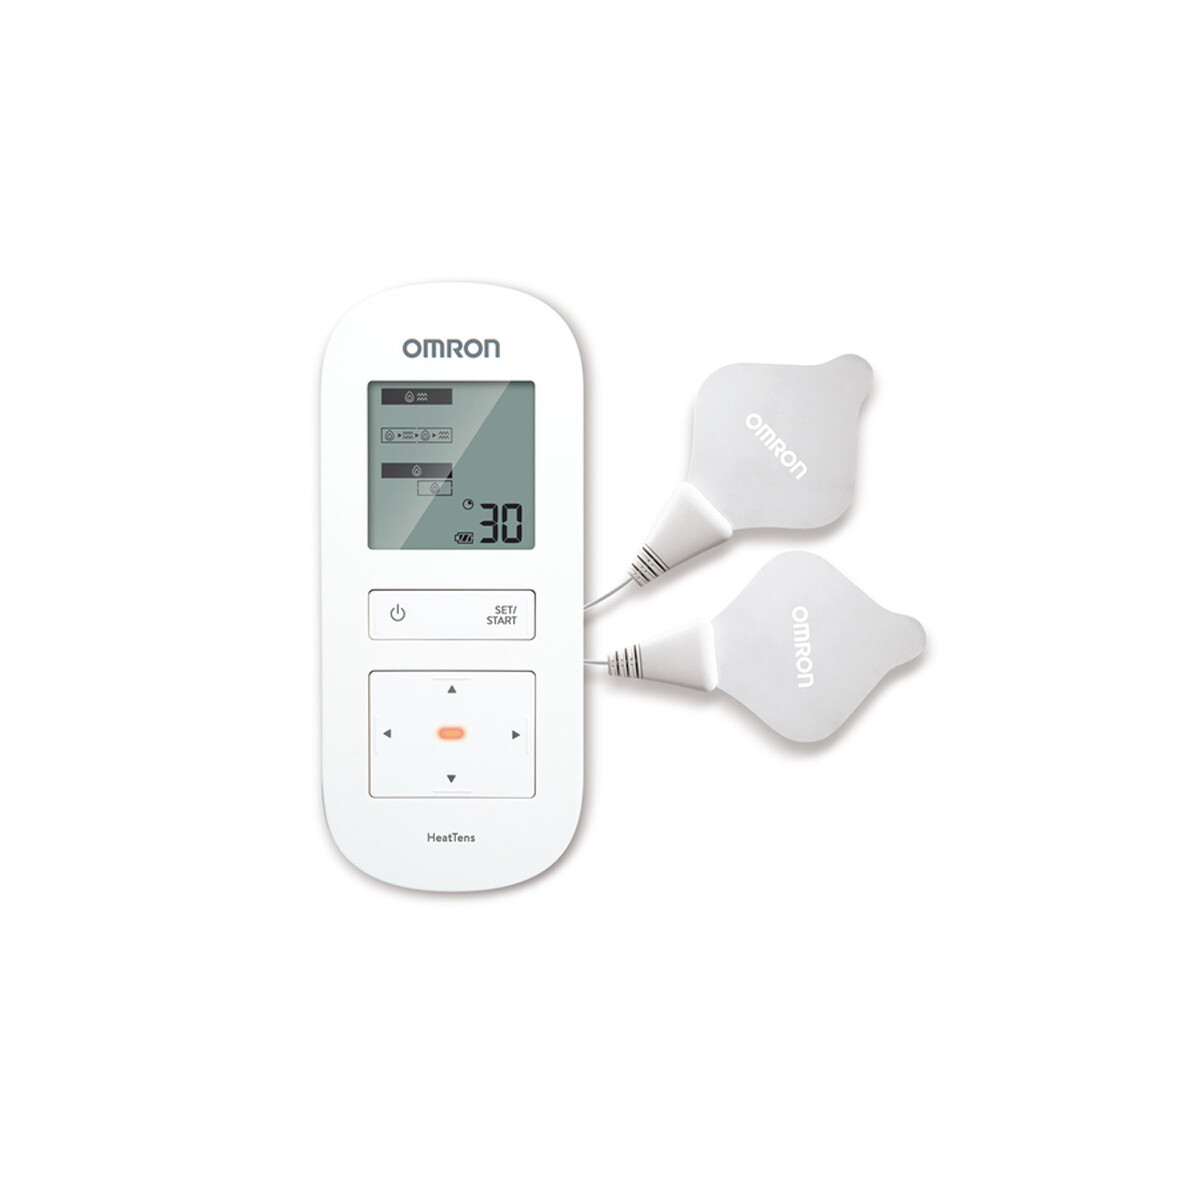 OMRON TENS Therapy Machine for Pain Relief